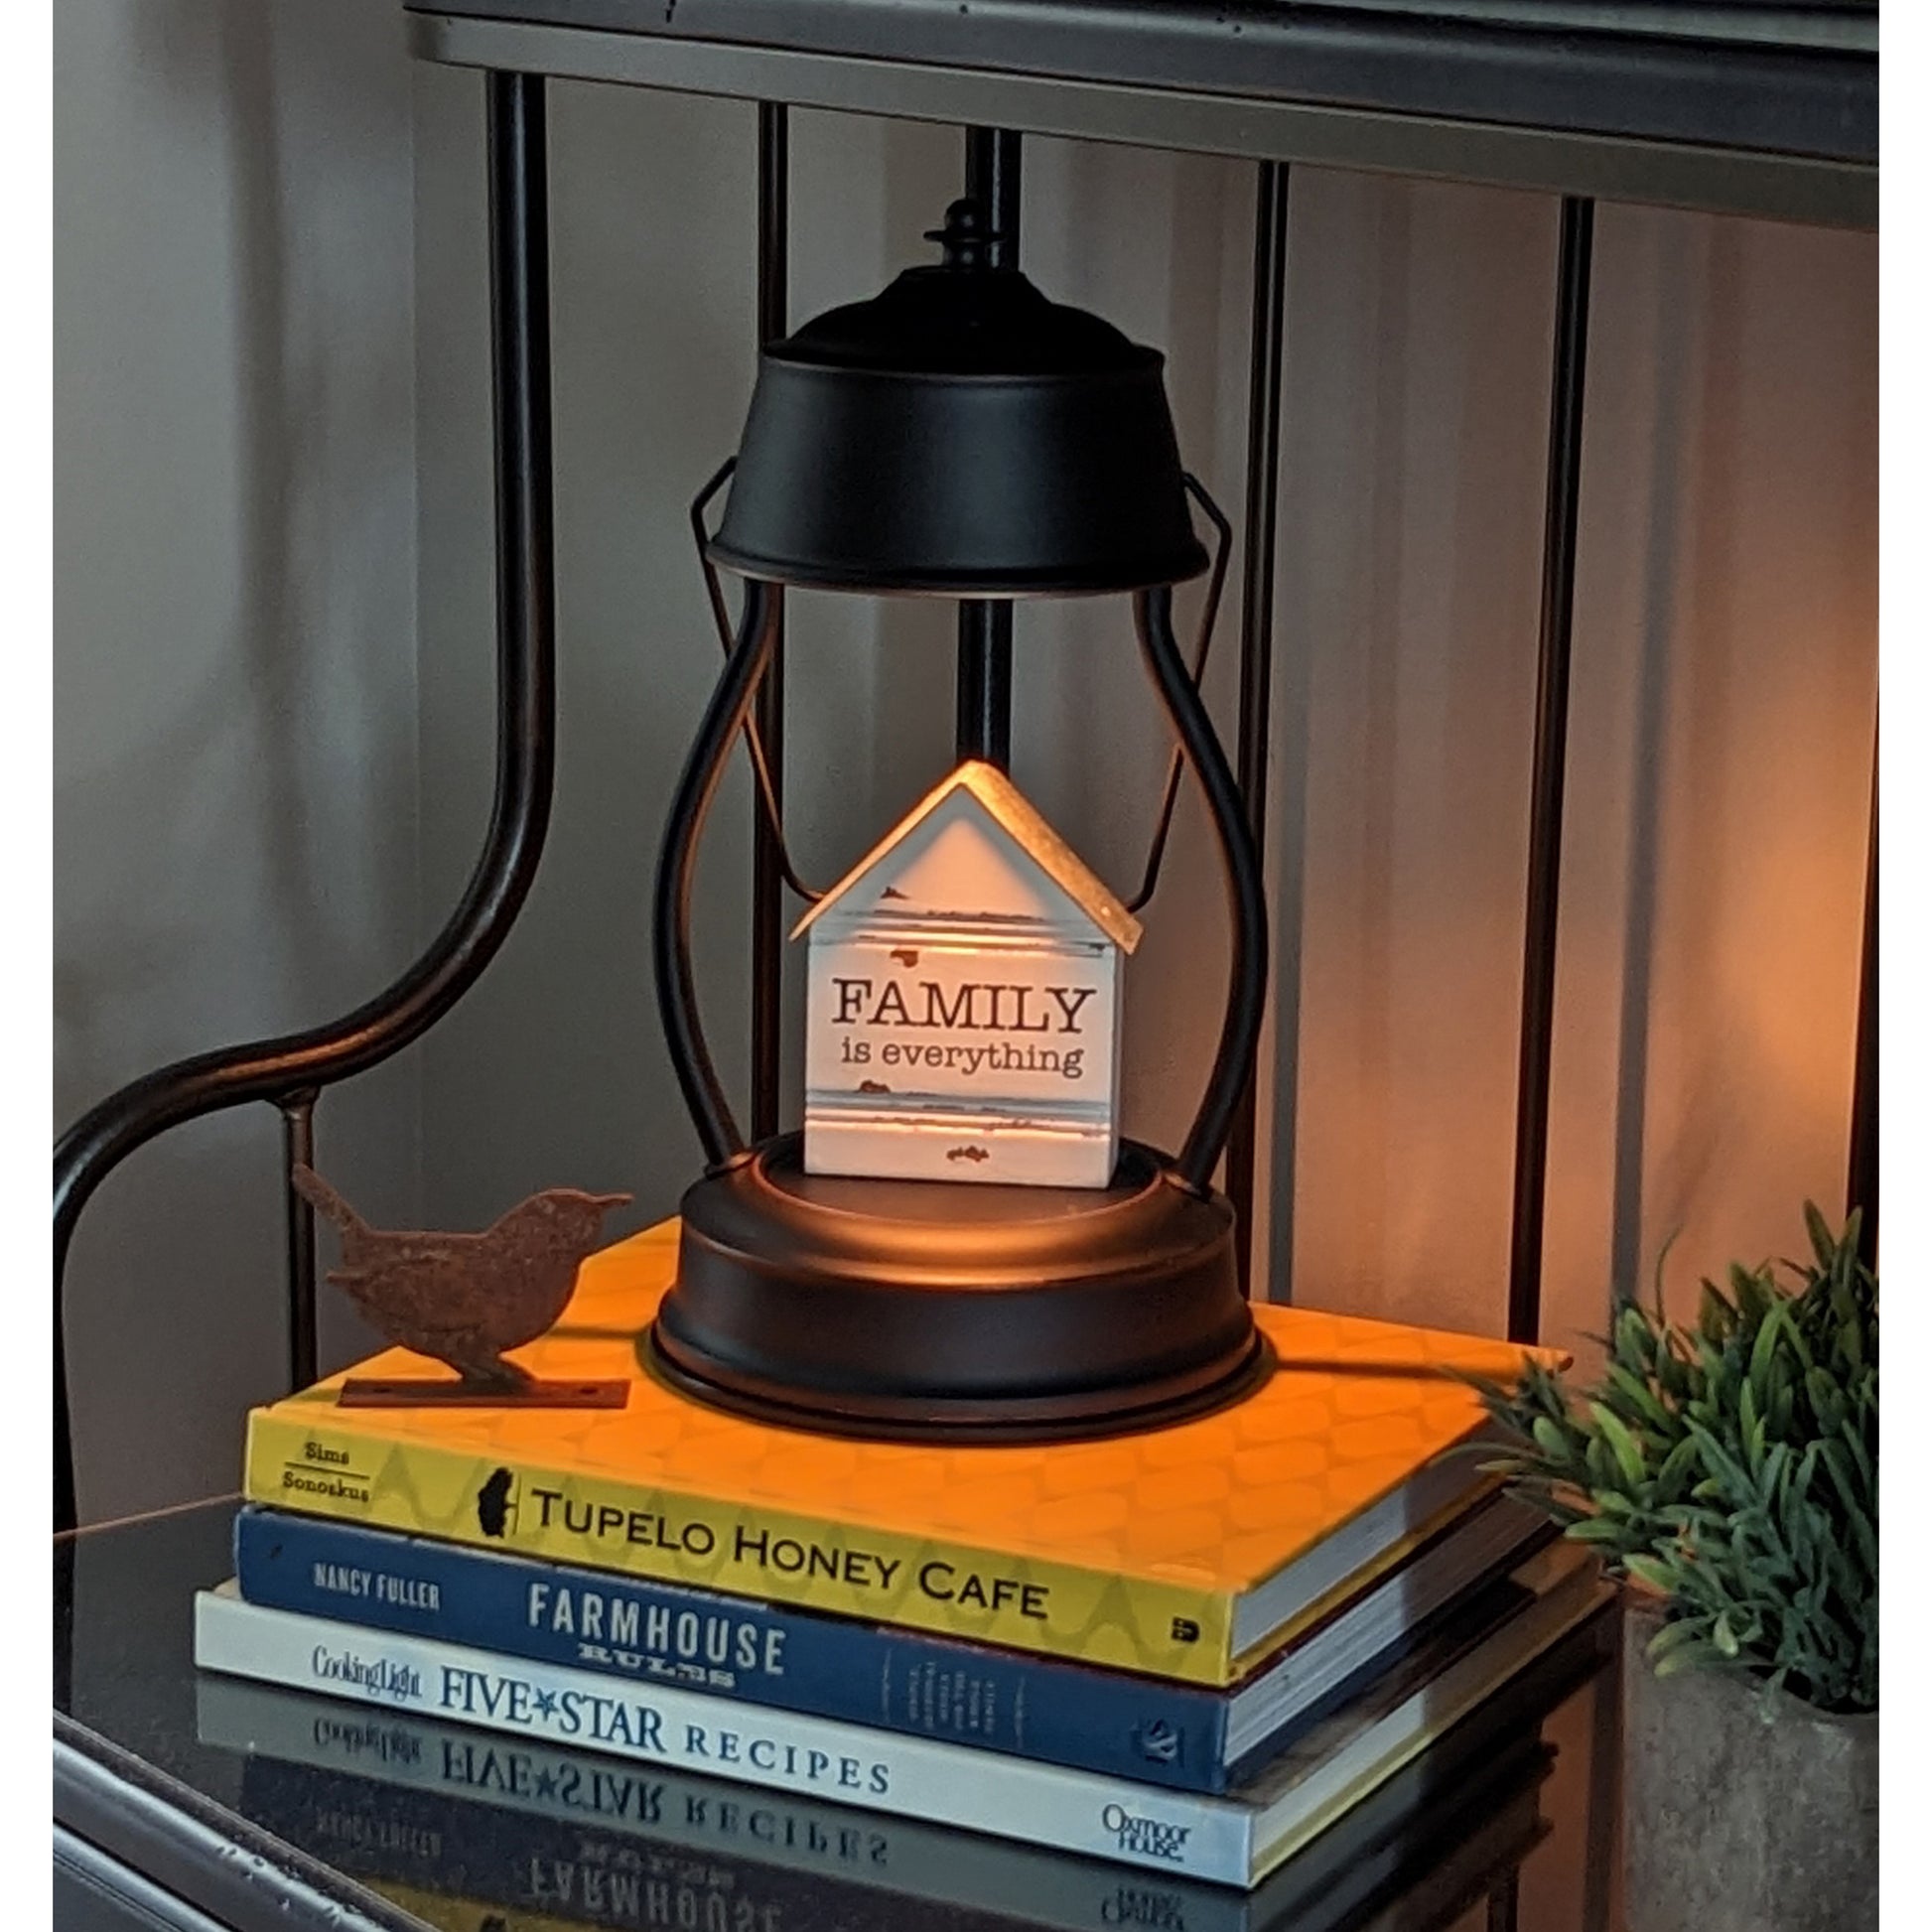 Image, lit rubbed bronze candle warmer with knickknack displayed placed on shelf on top of cookbooks.